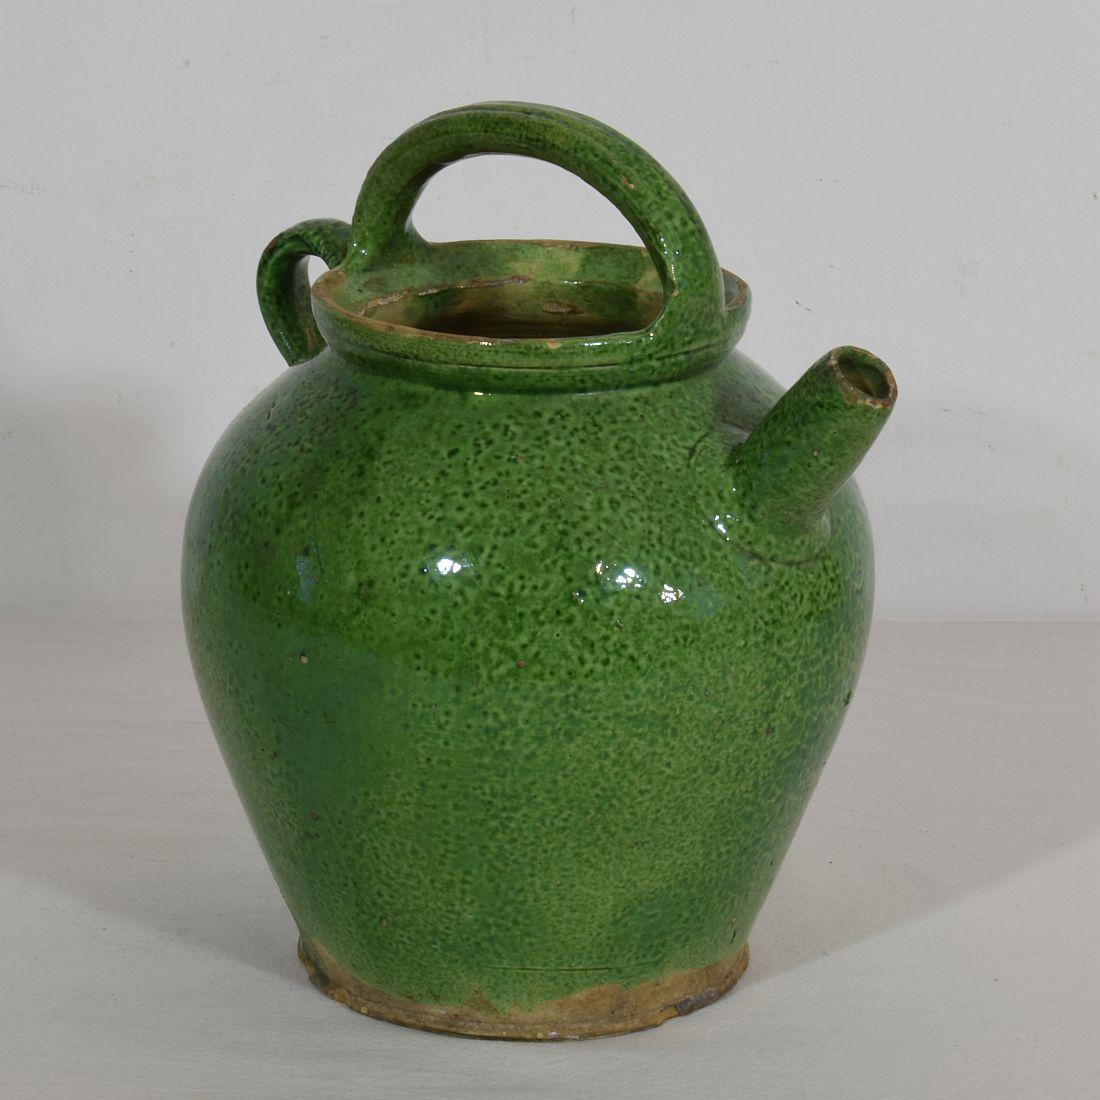 Great authentic piece of pottery from the Provence. Unique and rare glaze. Beautiful weathered. Chips and imperfections help authenticate this water cruche as it was a utilitarian type piece,
France, circa 1850-1900
Good condition.